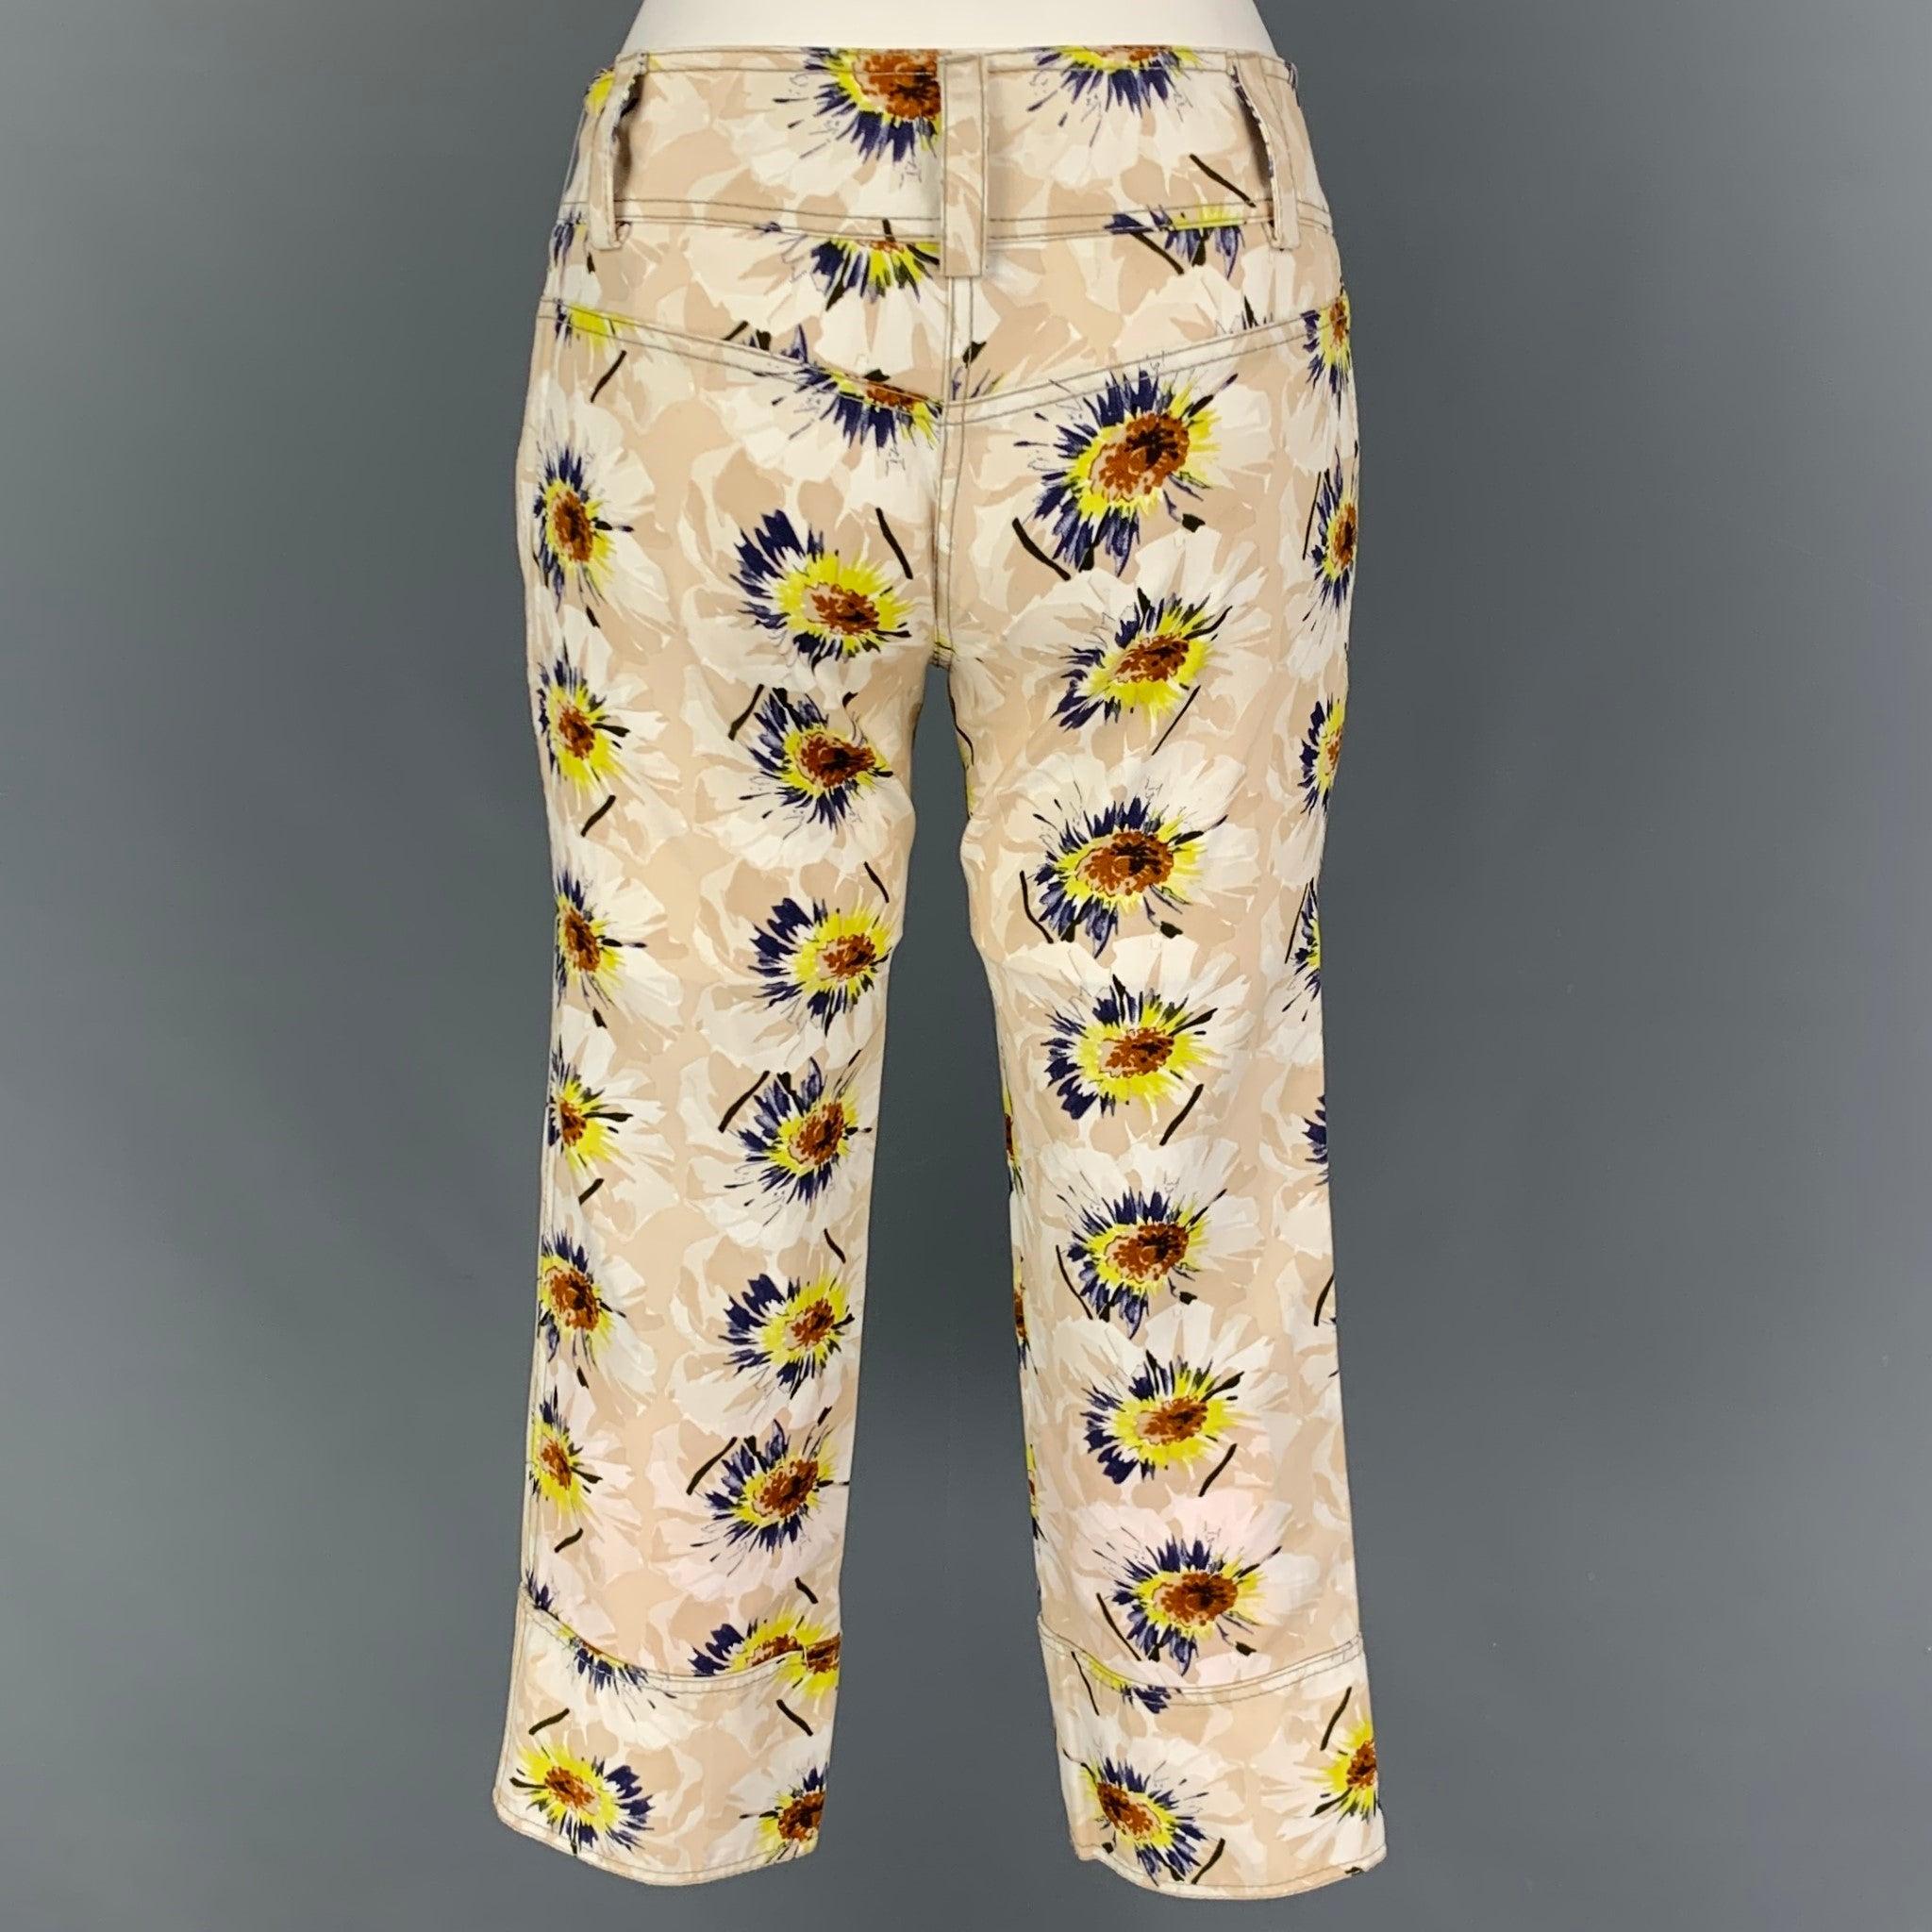 VALENTINO pants comes in a beige & multi-color floral cotton featuring a cropped leg, zip fly, and a double button closure.
Very Good
Pre-Owned Condition. 

Marked:   38/2 

Measurements: 
  Waist: 28 inches  Rise: 8 inches  Inseam: 24 inches 
  
 